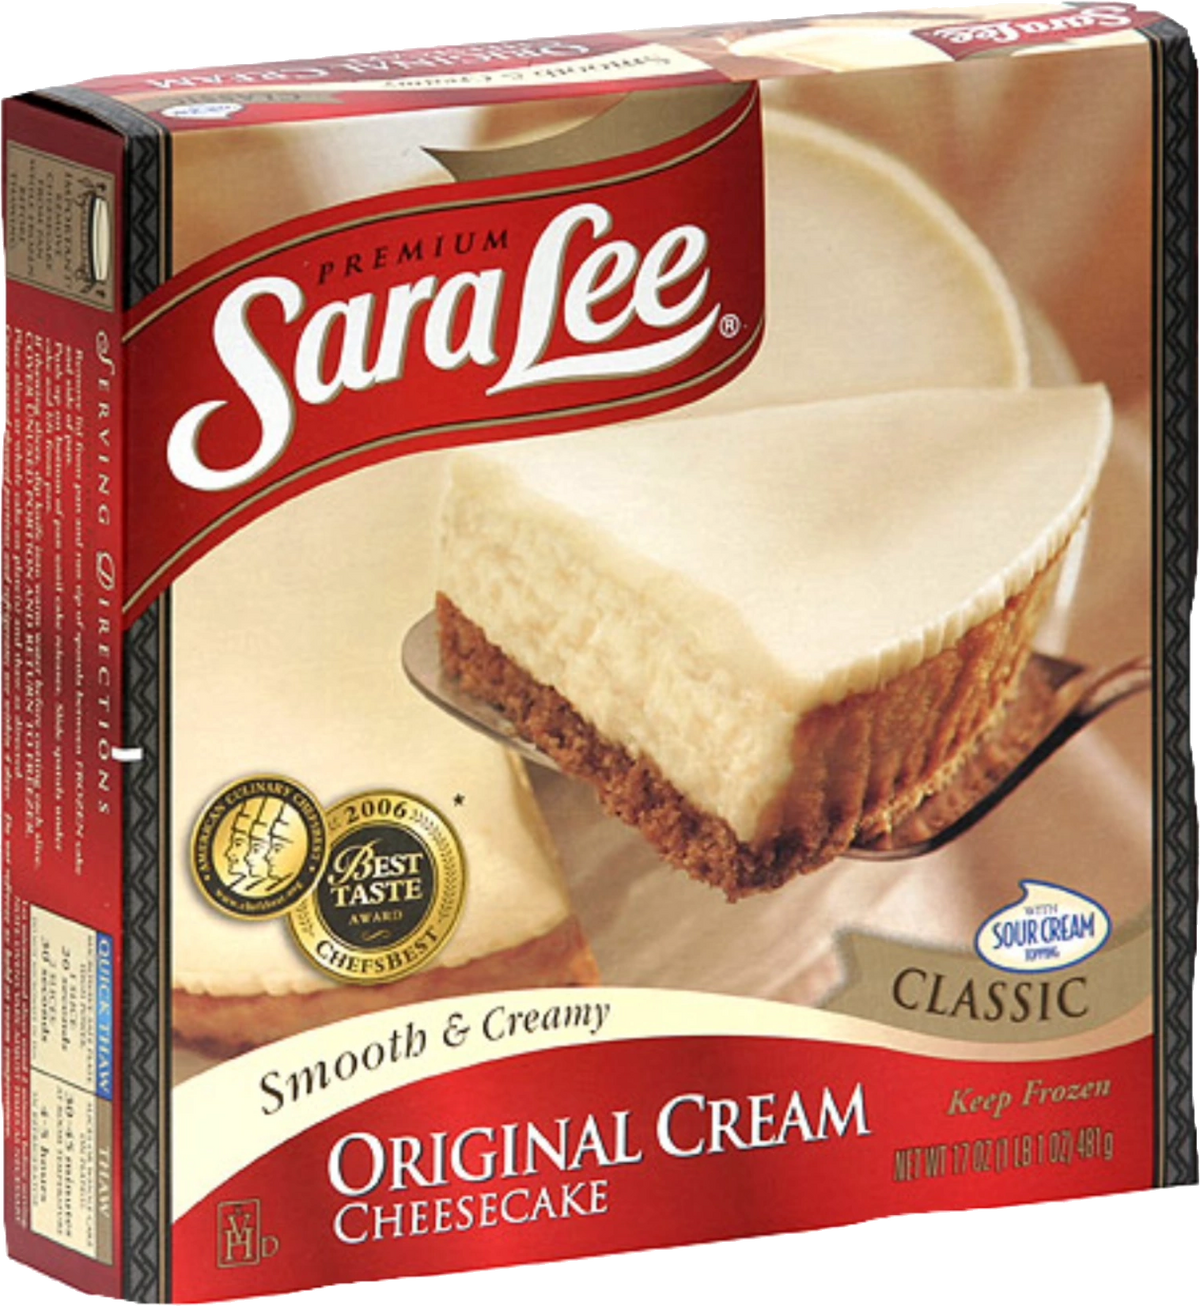 https://static.wikia.nocookie.net/sml/images/0/04/Sara_Lee_Cheesecake_Transparent.PNG/revision/latest/scale-to-width-down/1200?cb=20200124231555